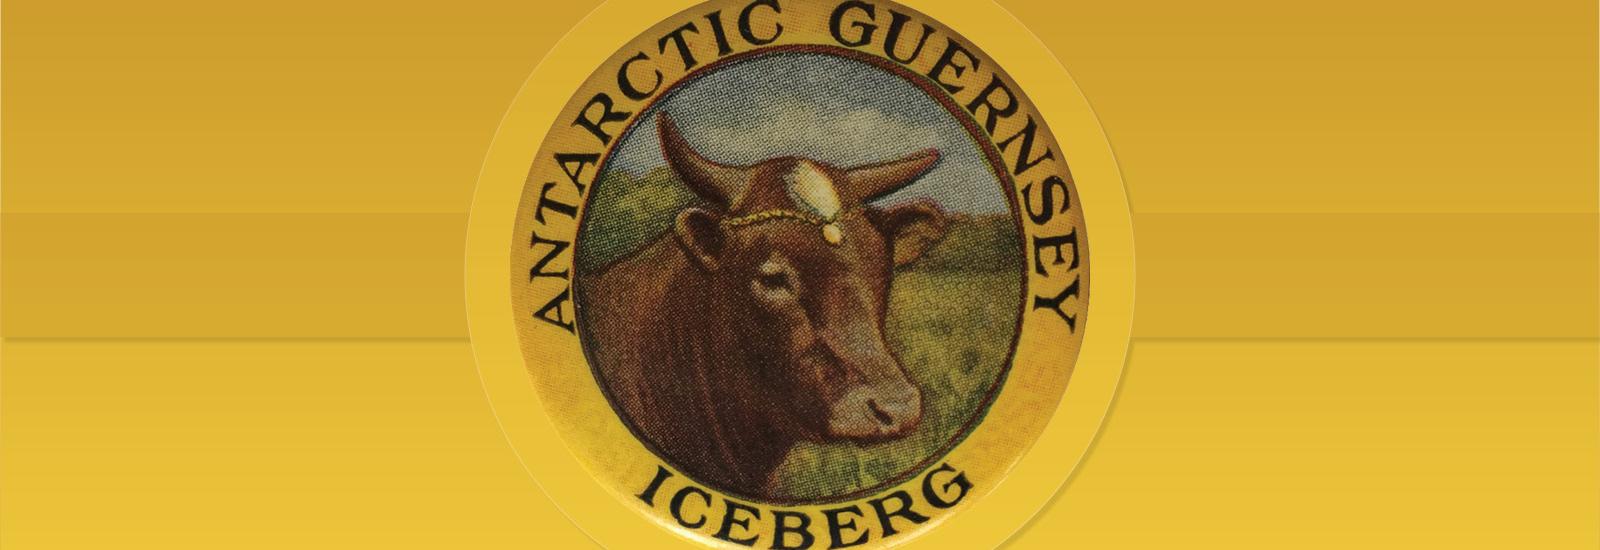 Pin commemorating the birth of the dairy cow, Iceberg. The back reads: Born December 19, 1933 on the Byrd Antarctic Expedition - The farthest south of any dairy animal.